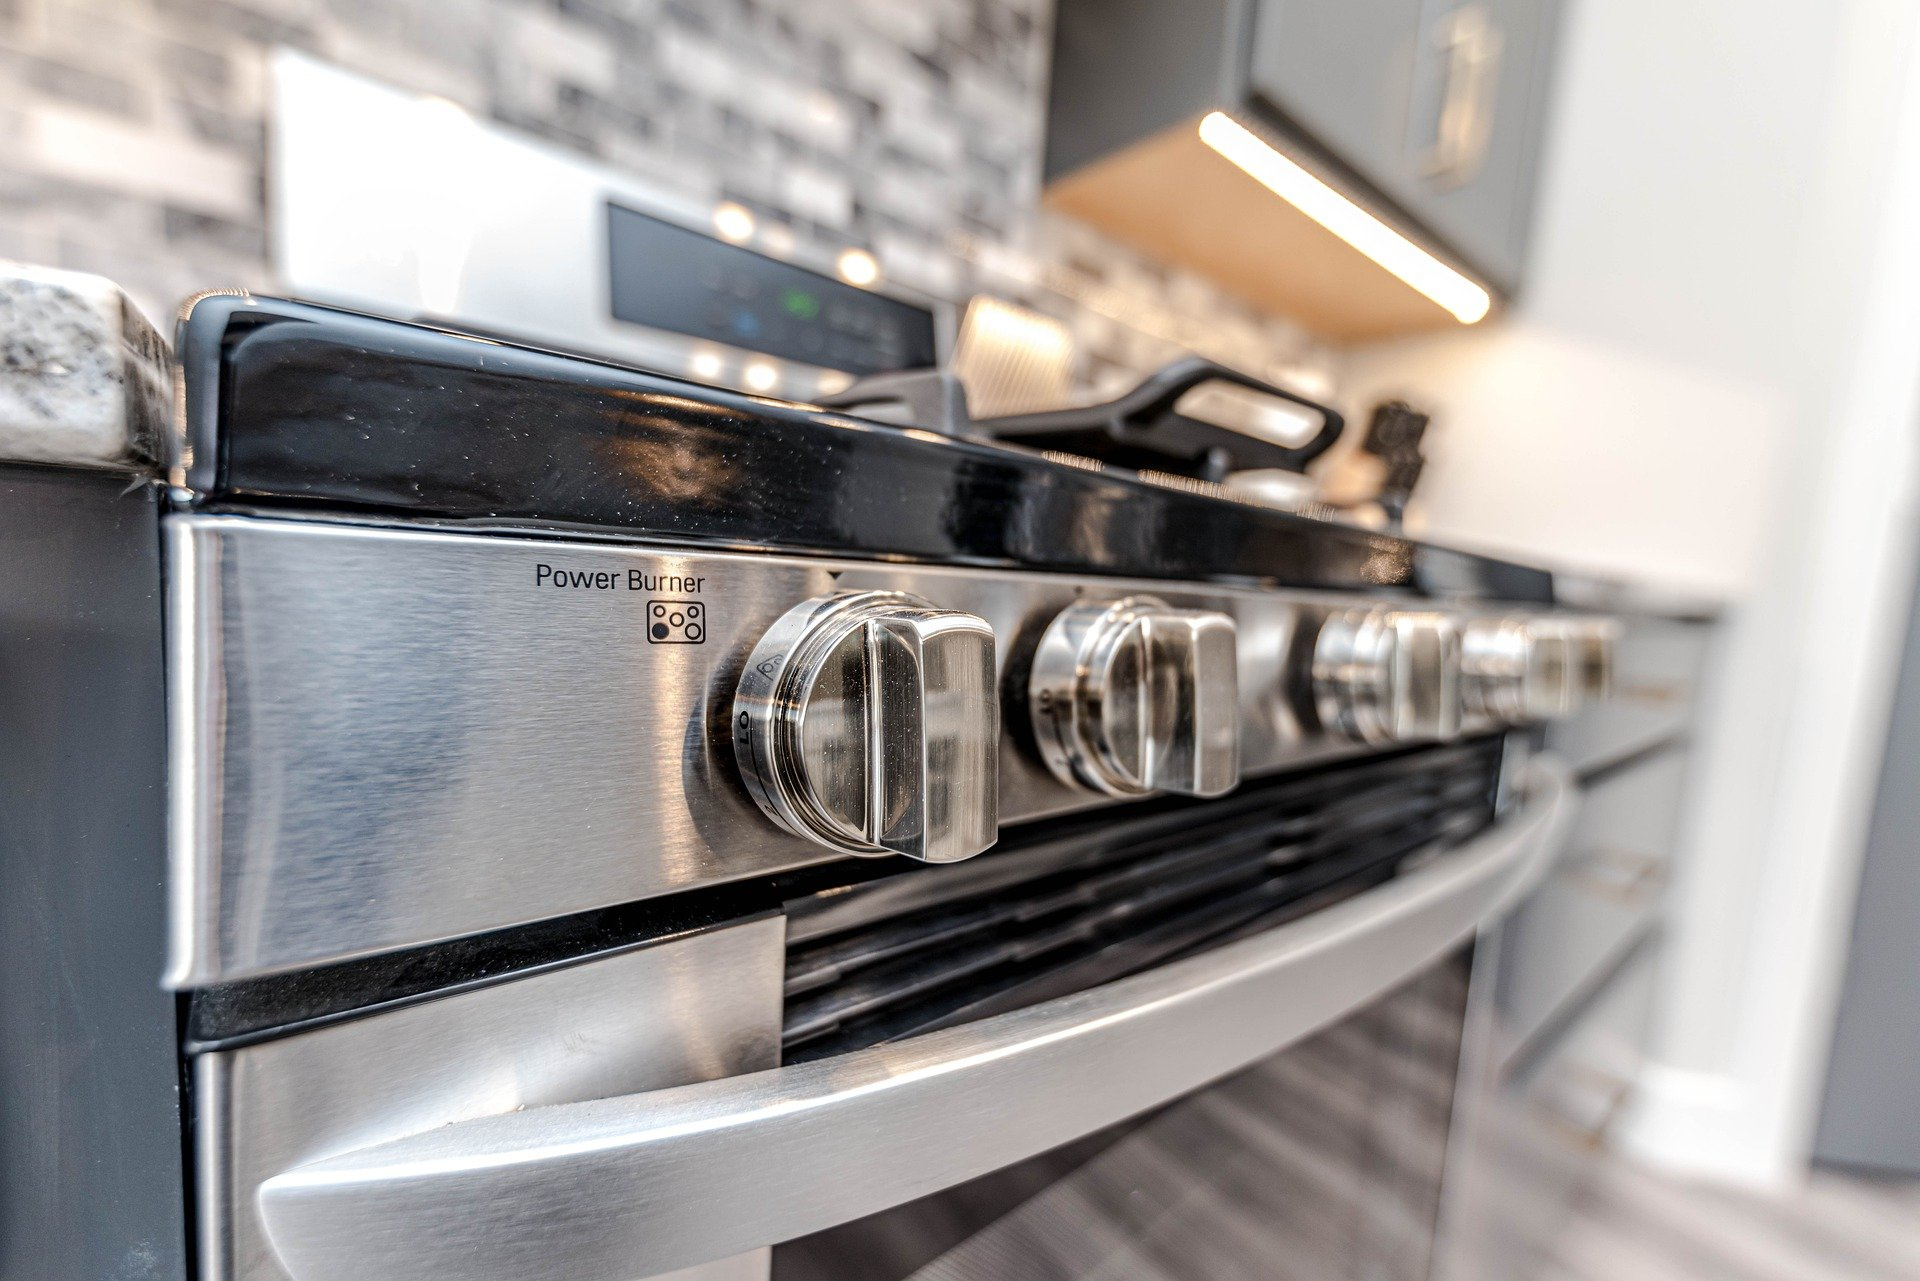 Appliance Repair Business in Summit County, Seller will finance!